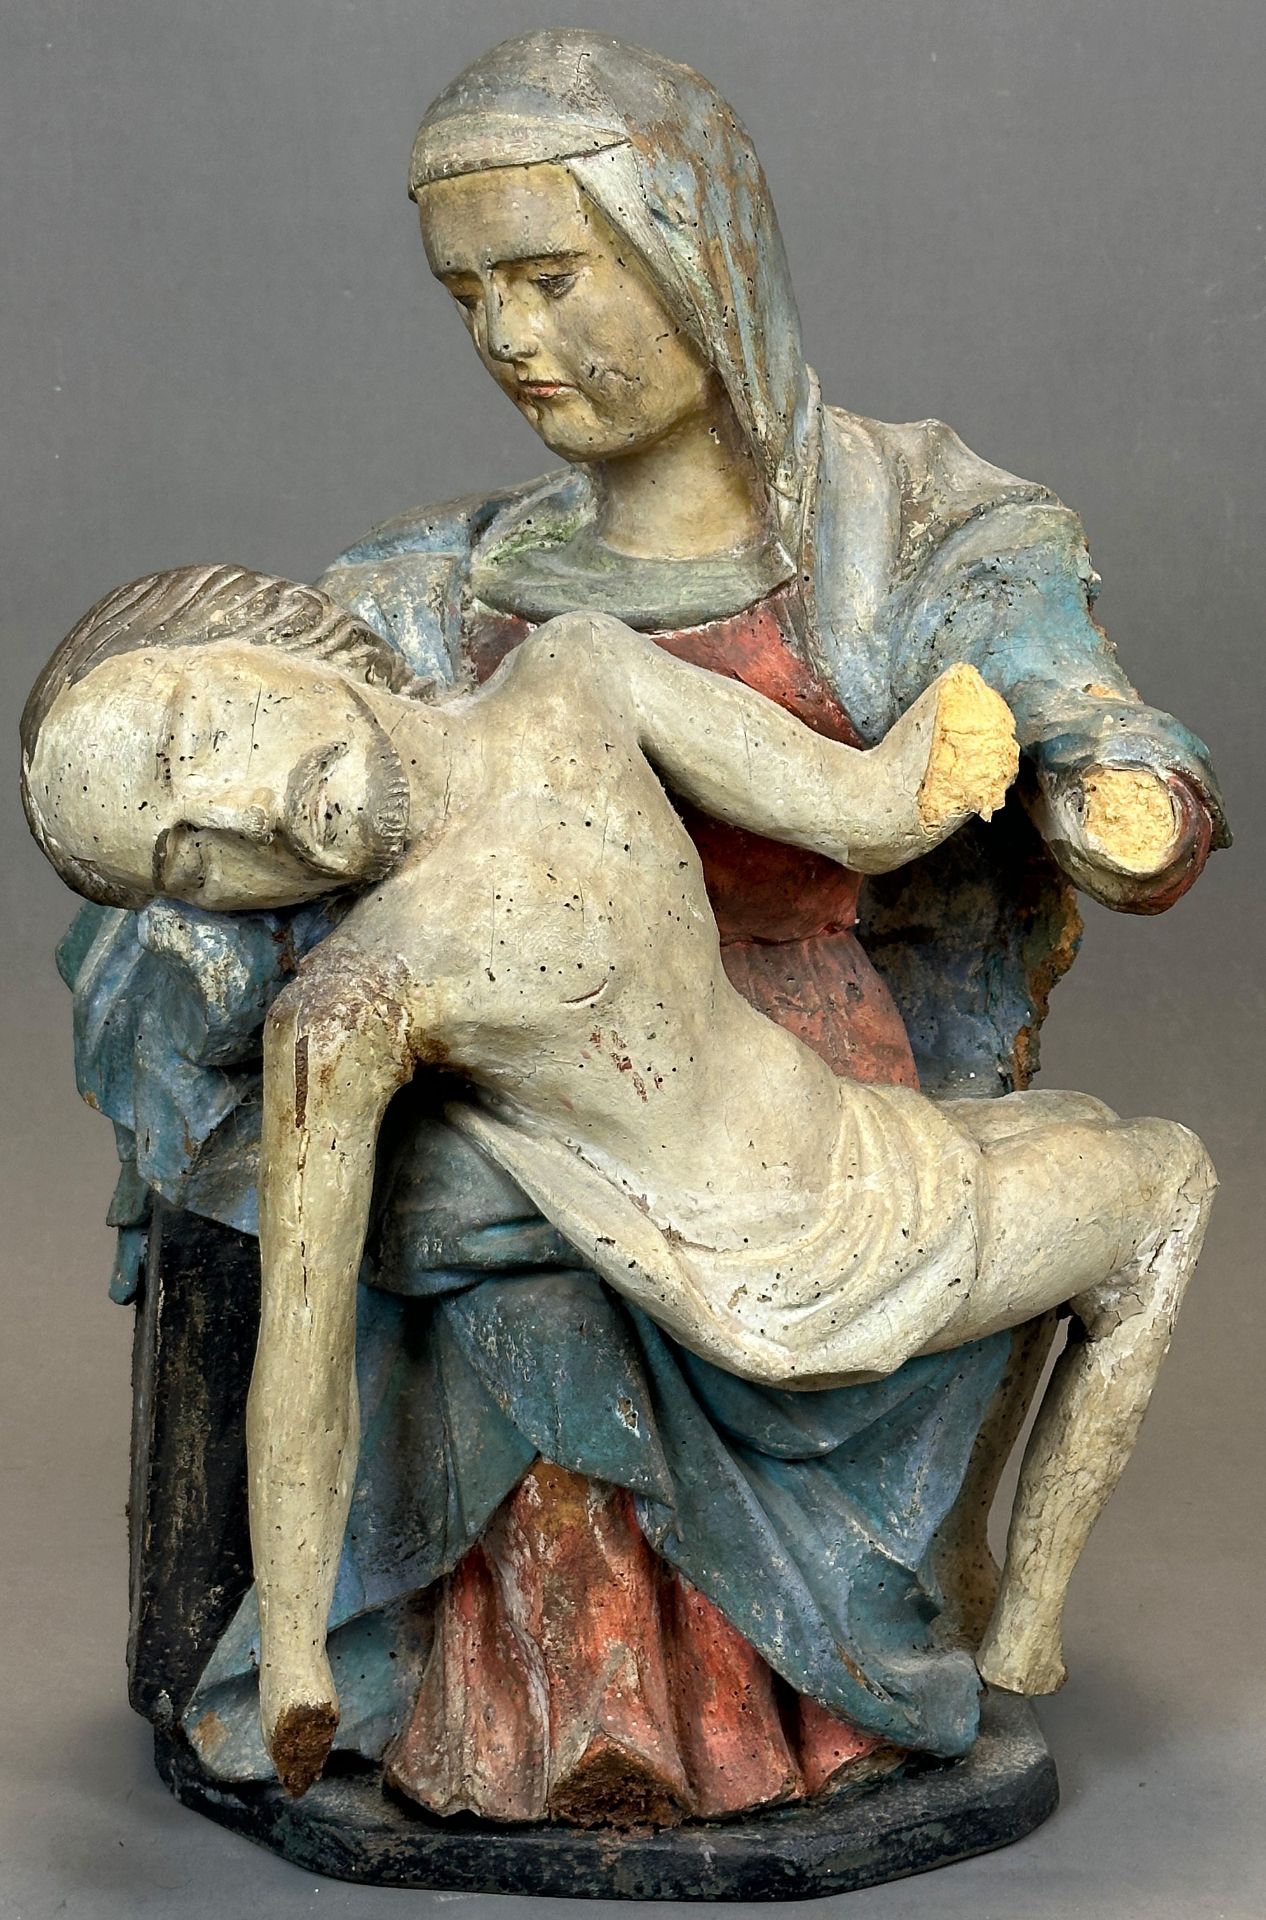 Wooden figure. Lamentation of the Virgin Mary / Pietà. 2nd half of the 17th century. Lower Rhine.